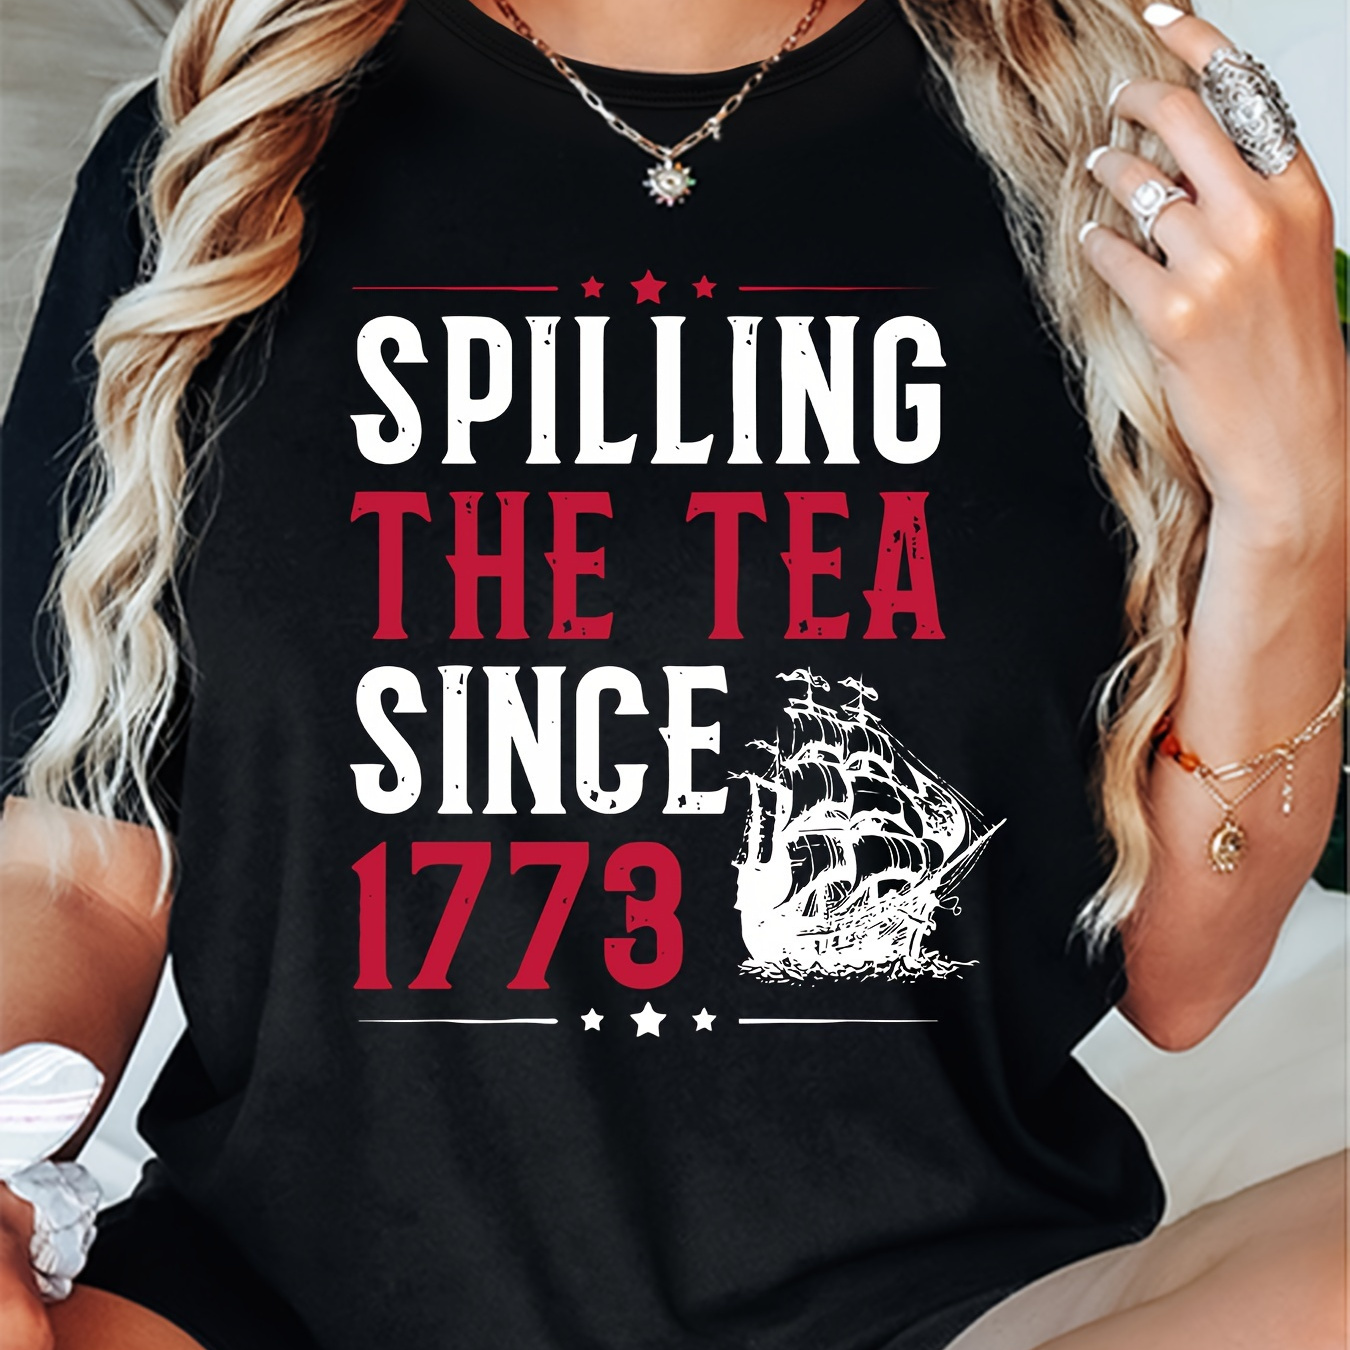 

Women's Casual Round Neck T-shirt With "spilling The Tea Since 1773" Print, Short Sleeve Casual Tee, Sporty & Daily Wear Top For Spring & Summer